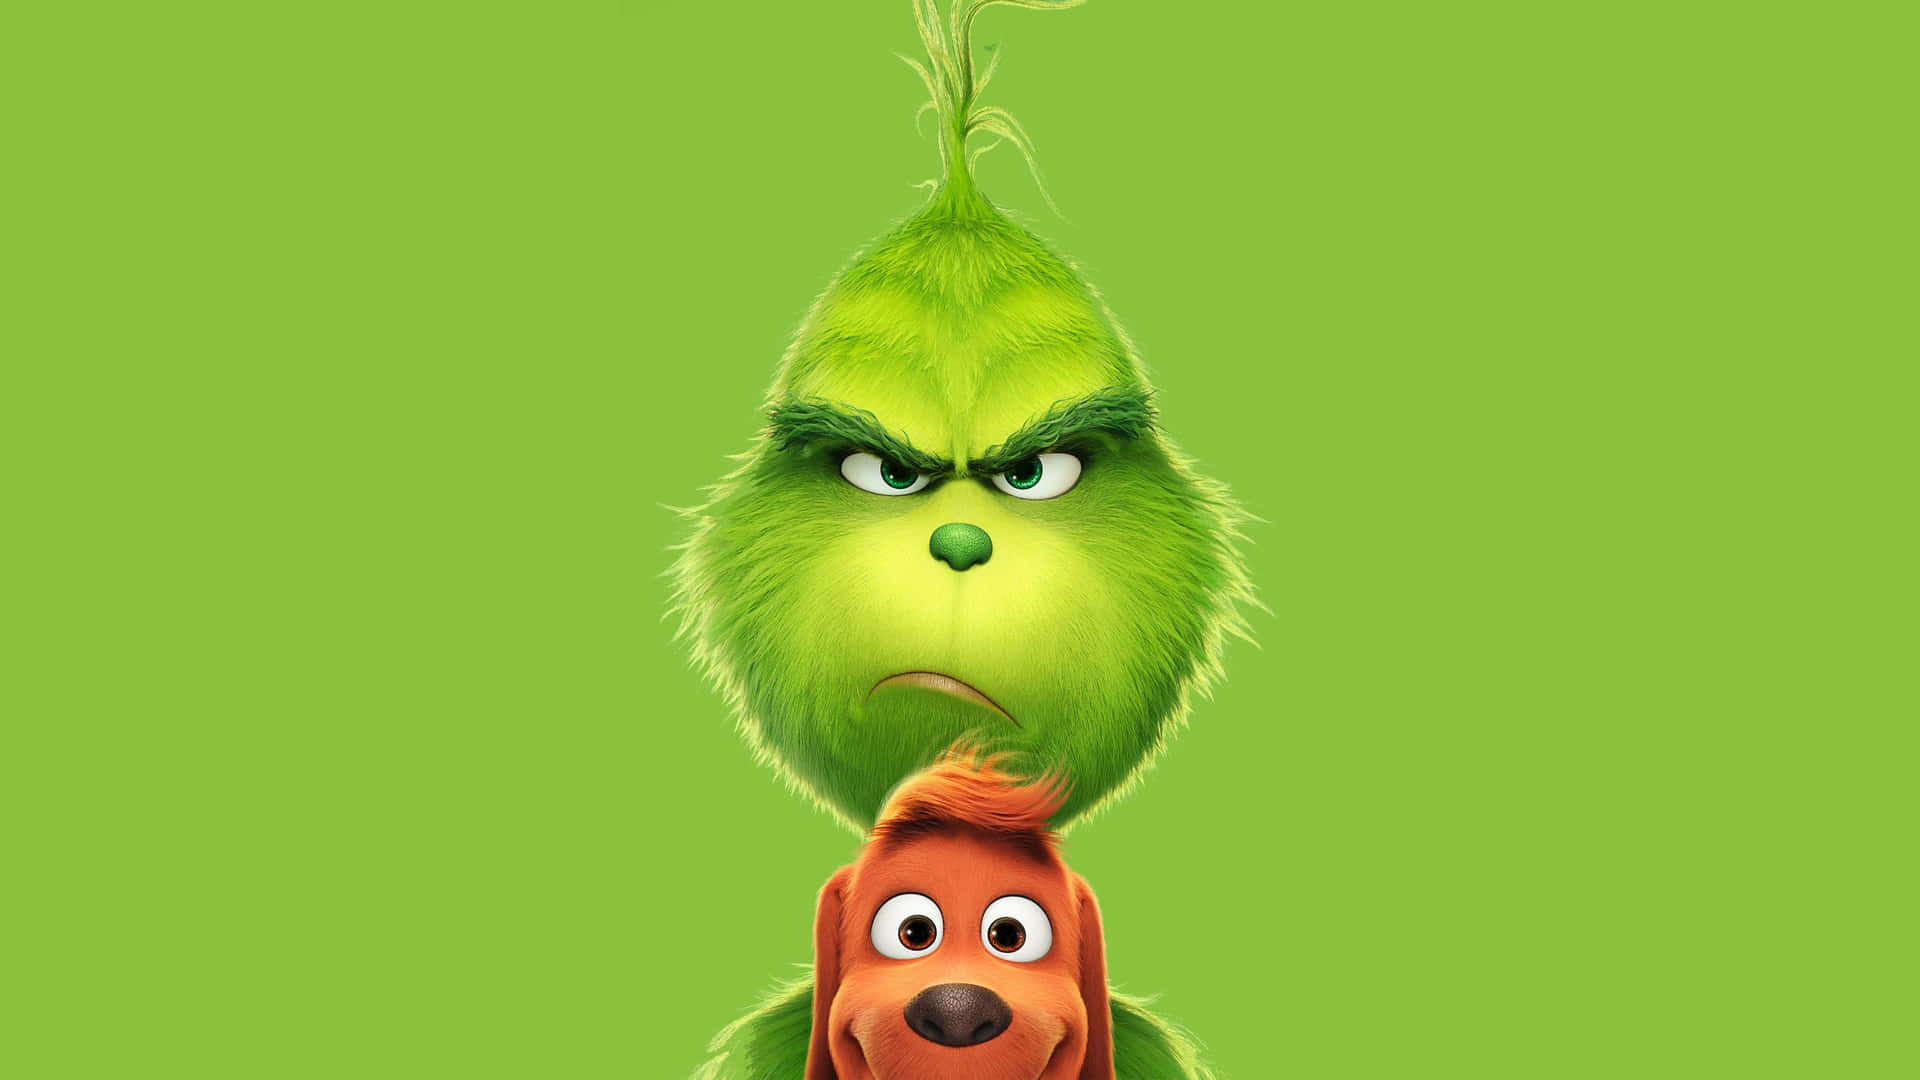 The Grinch is ready to spread some Christmas cheer! Wallpaper